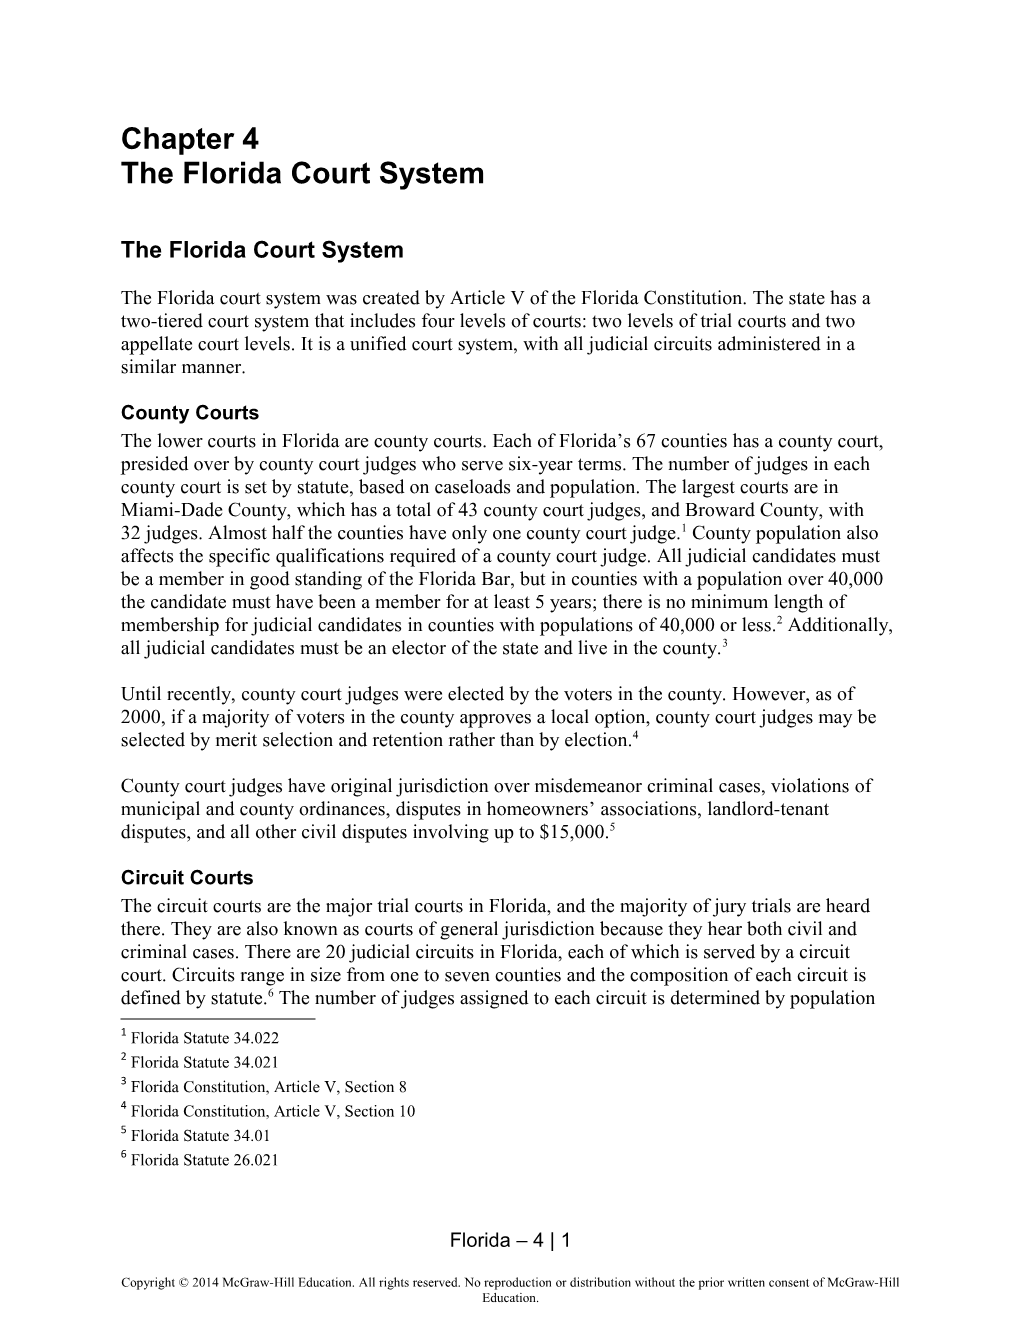 The Florida Court System